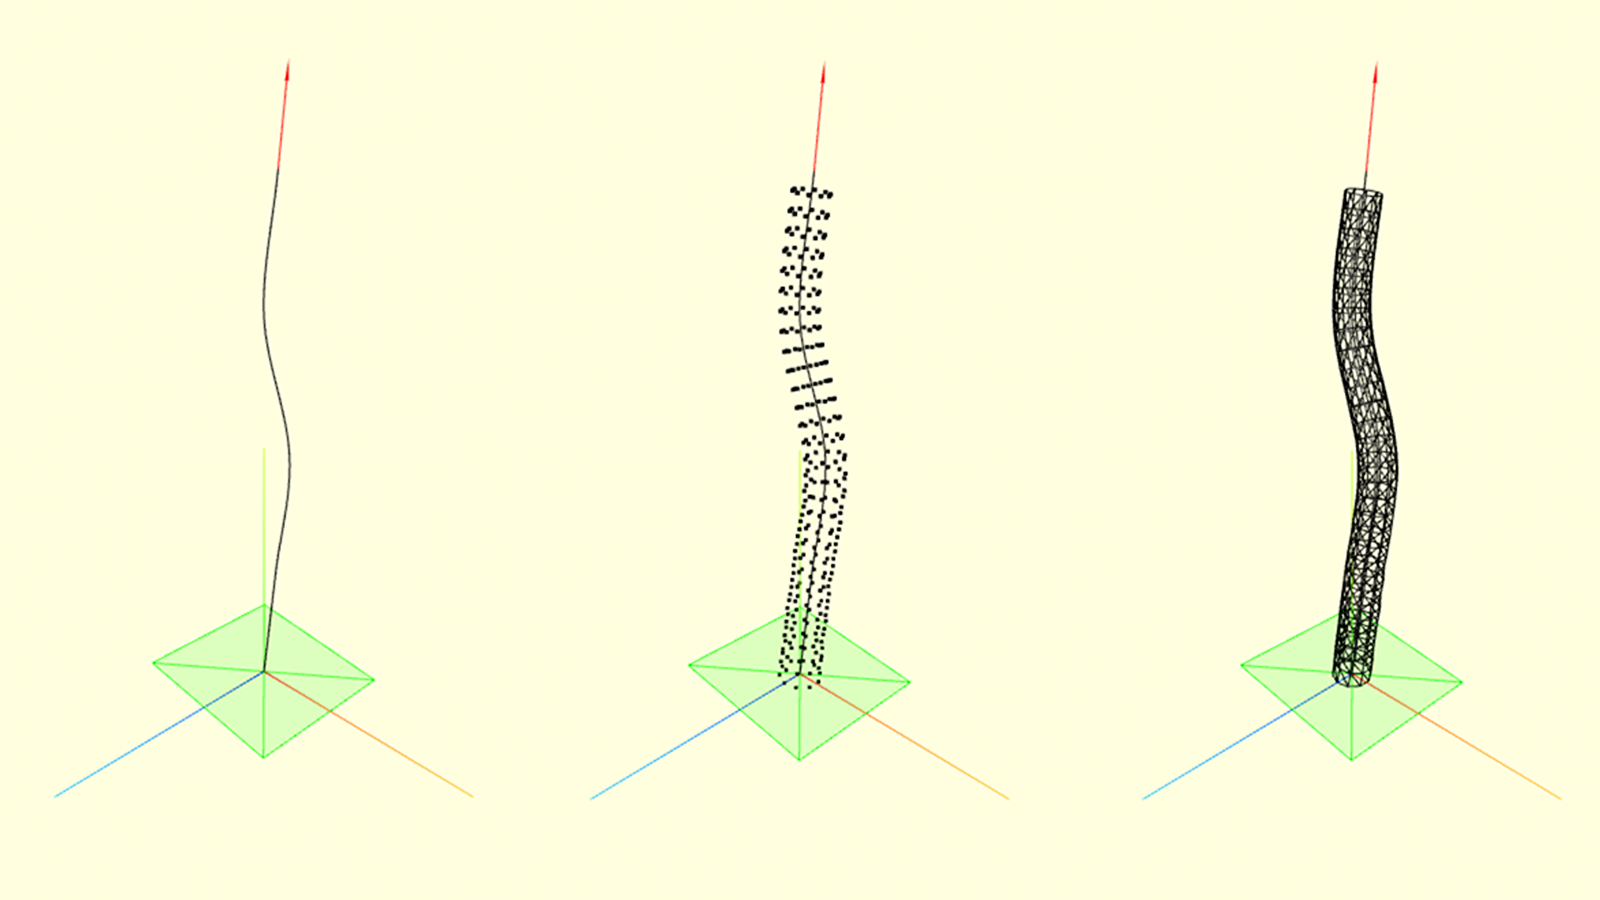 Stages of a stipe generation: spline, vertices, faces